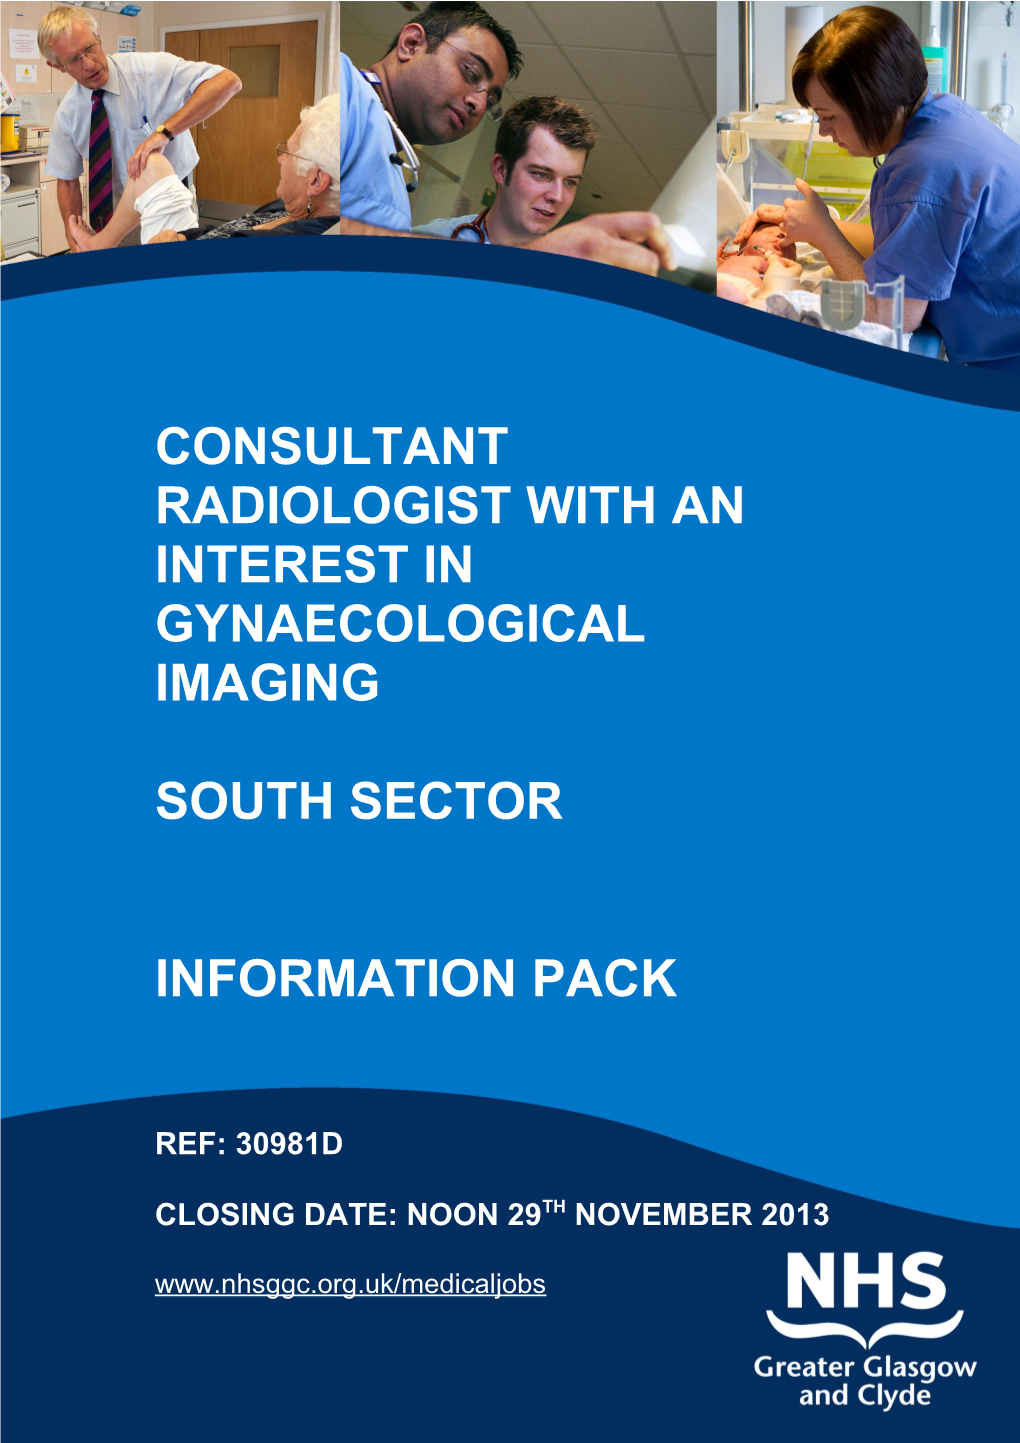 Consultant Radiologist with an Interest in Gynaecological Imaging